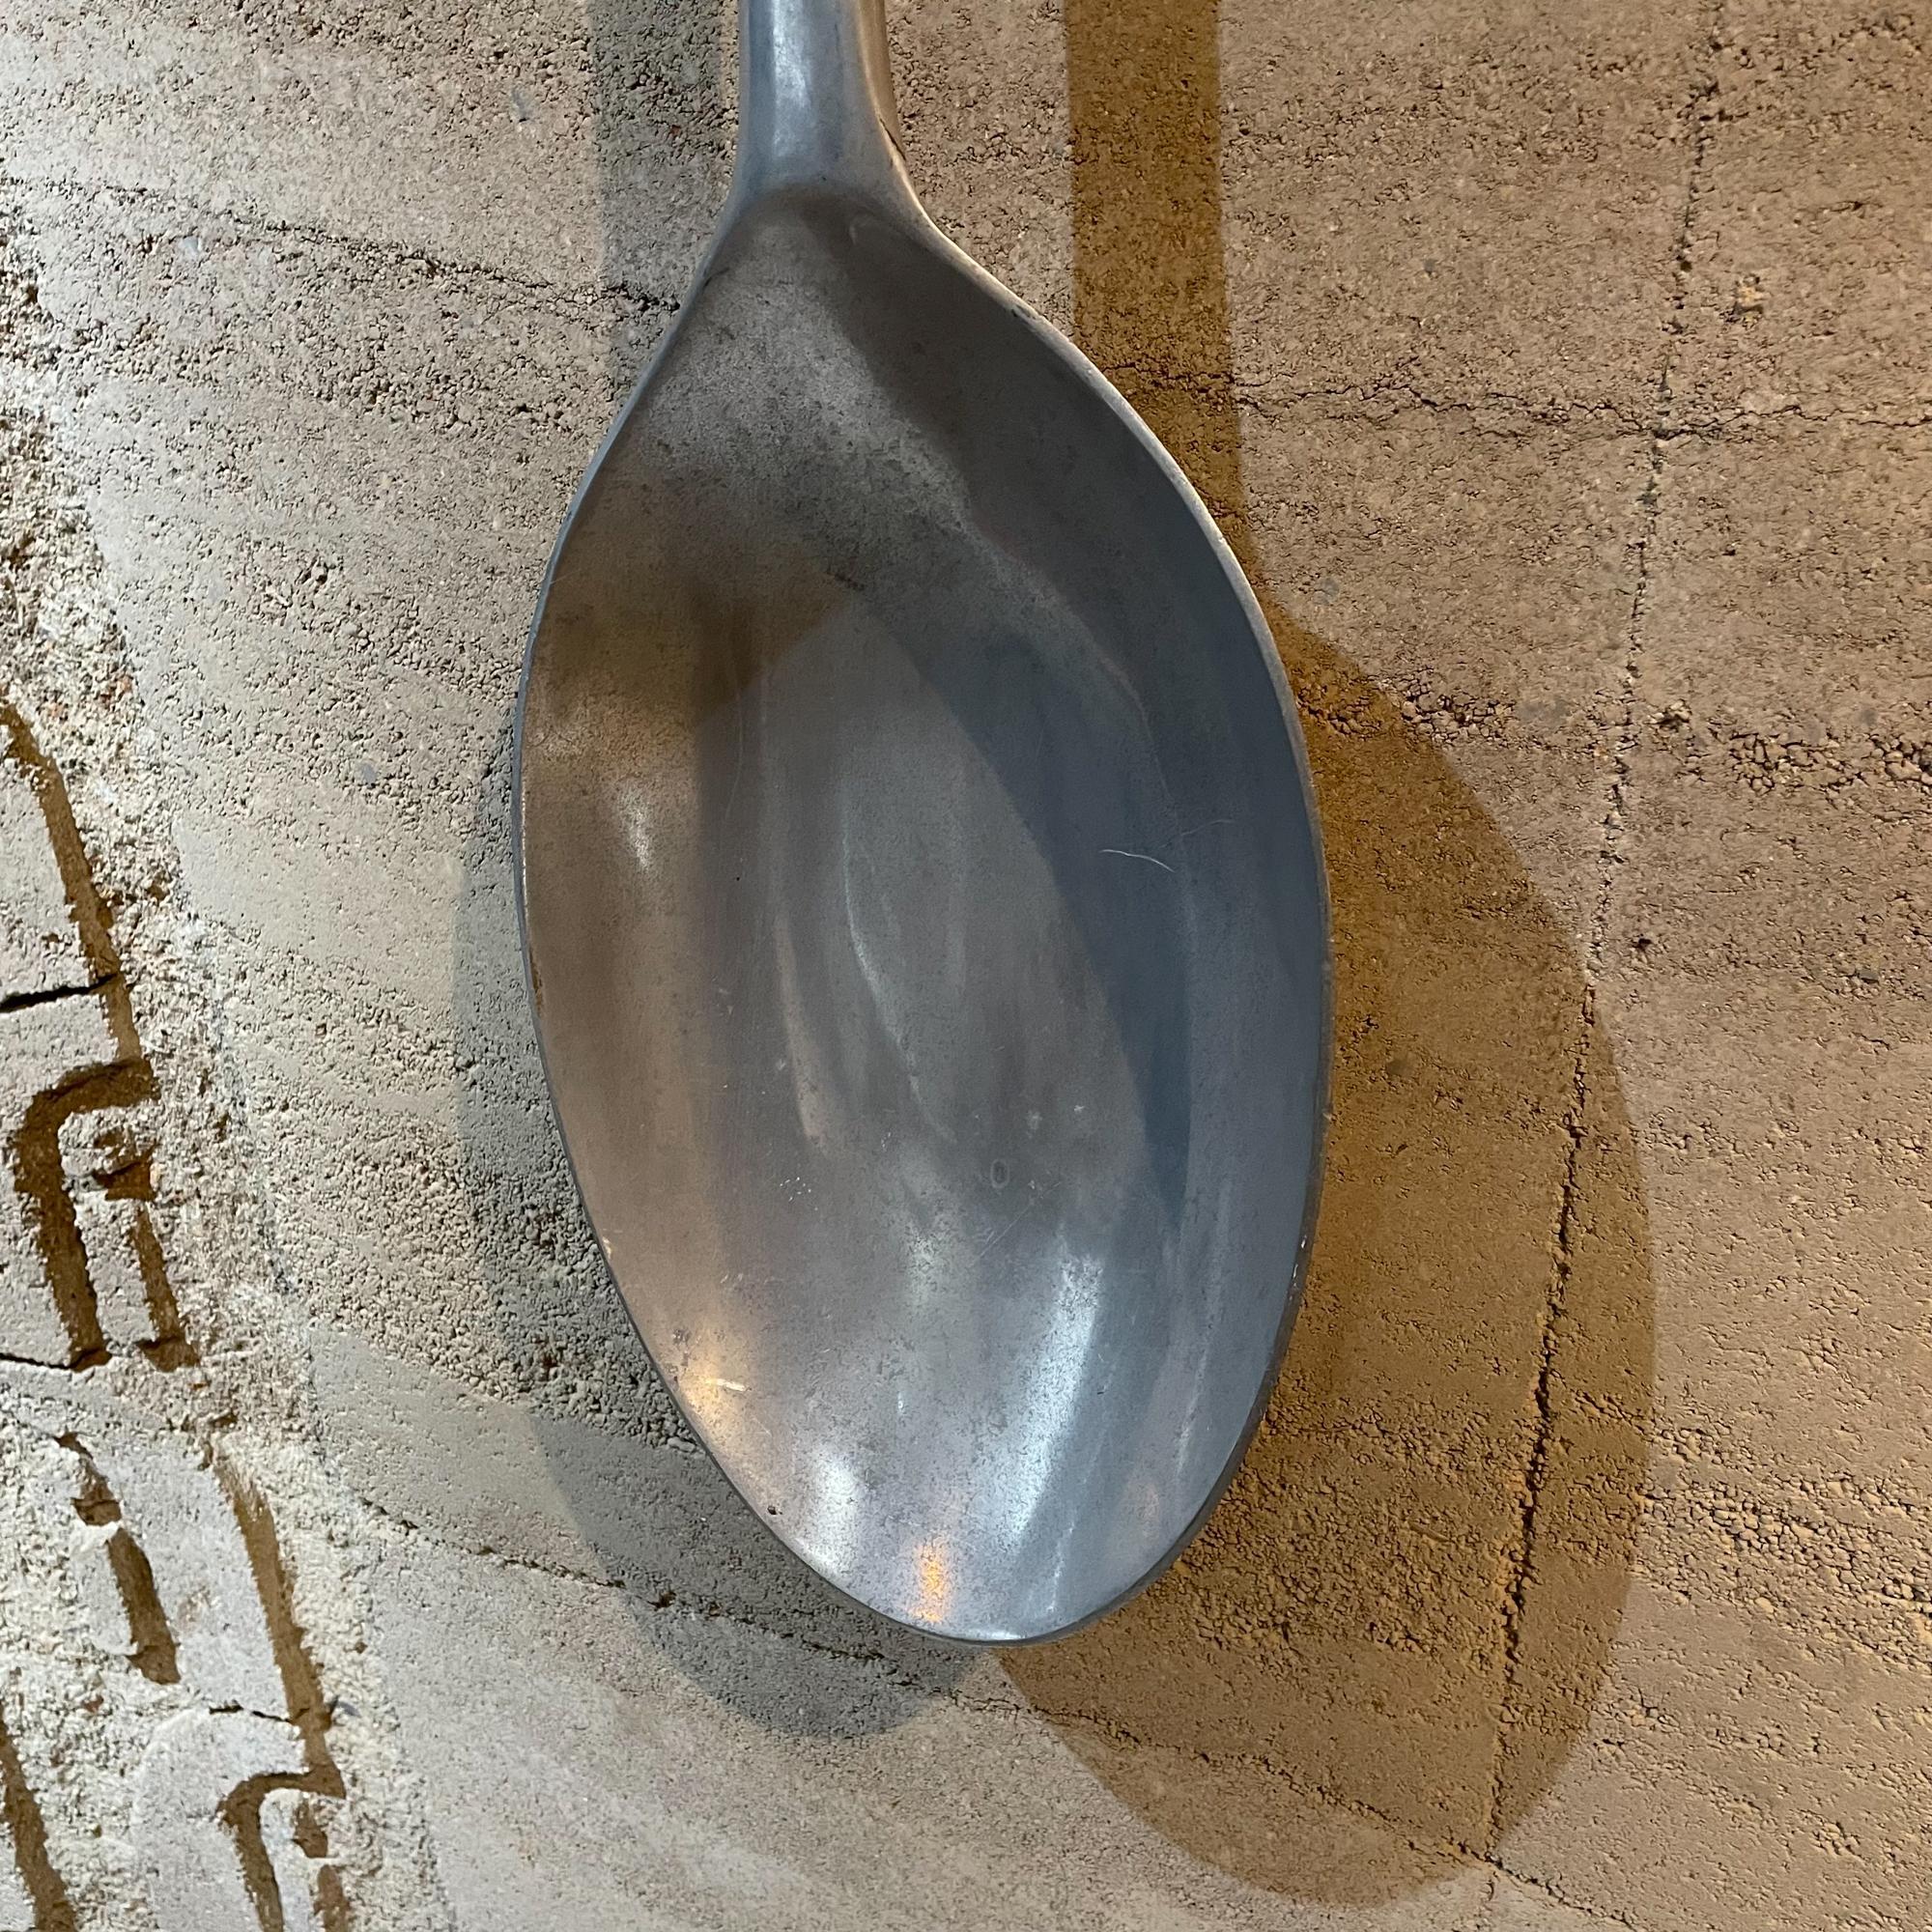 Featuring from 1979 Pop Art Curtis C. Jere giant kitchen utensil series: Curtis C Jere wall sculpture gigantic spoon
Unmarked No label present.
Measures: 46.75 T x 10.5 x 2.5 D
Retains original white wall bumpers on back.
Preowned unrestored